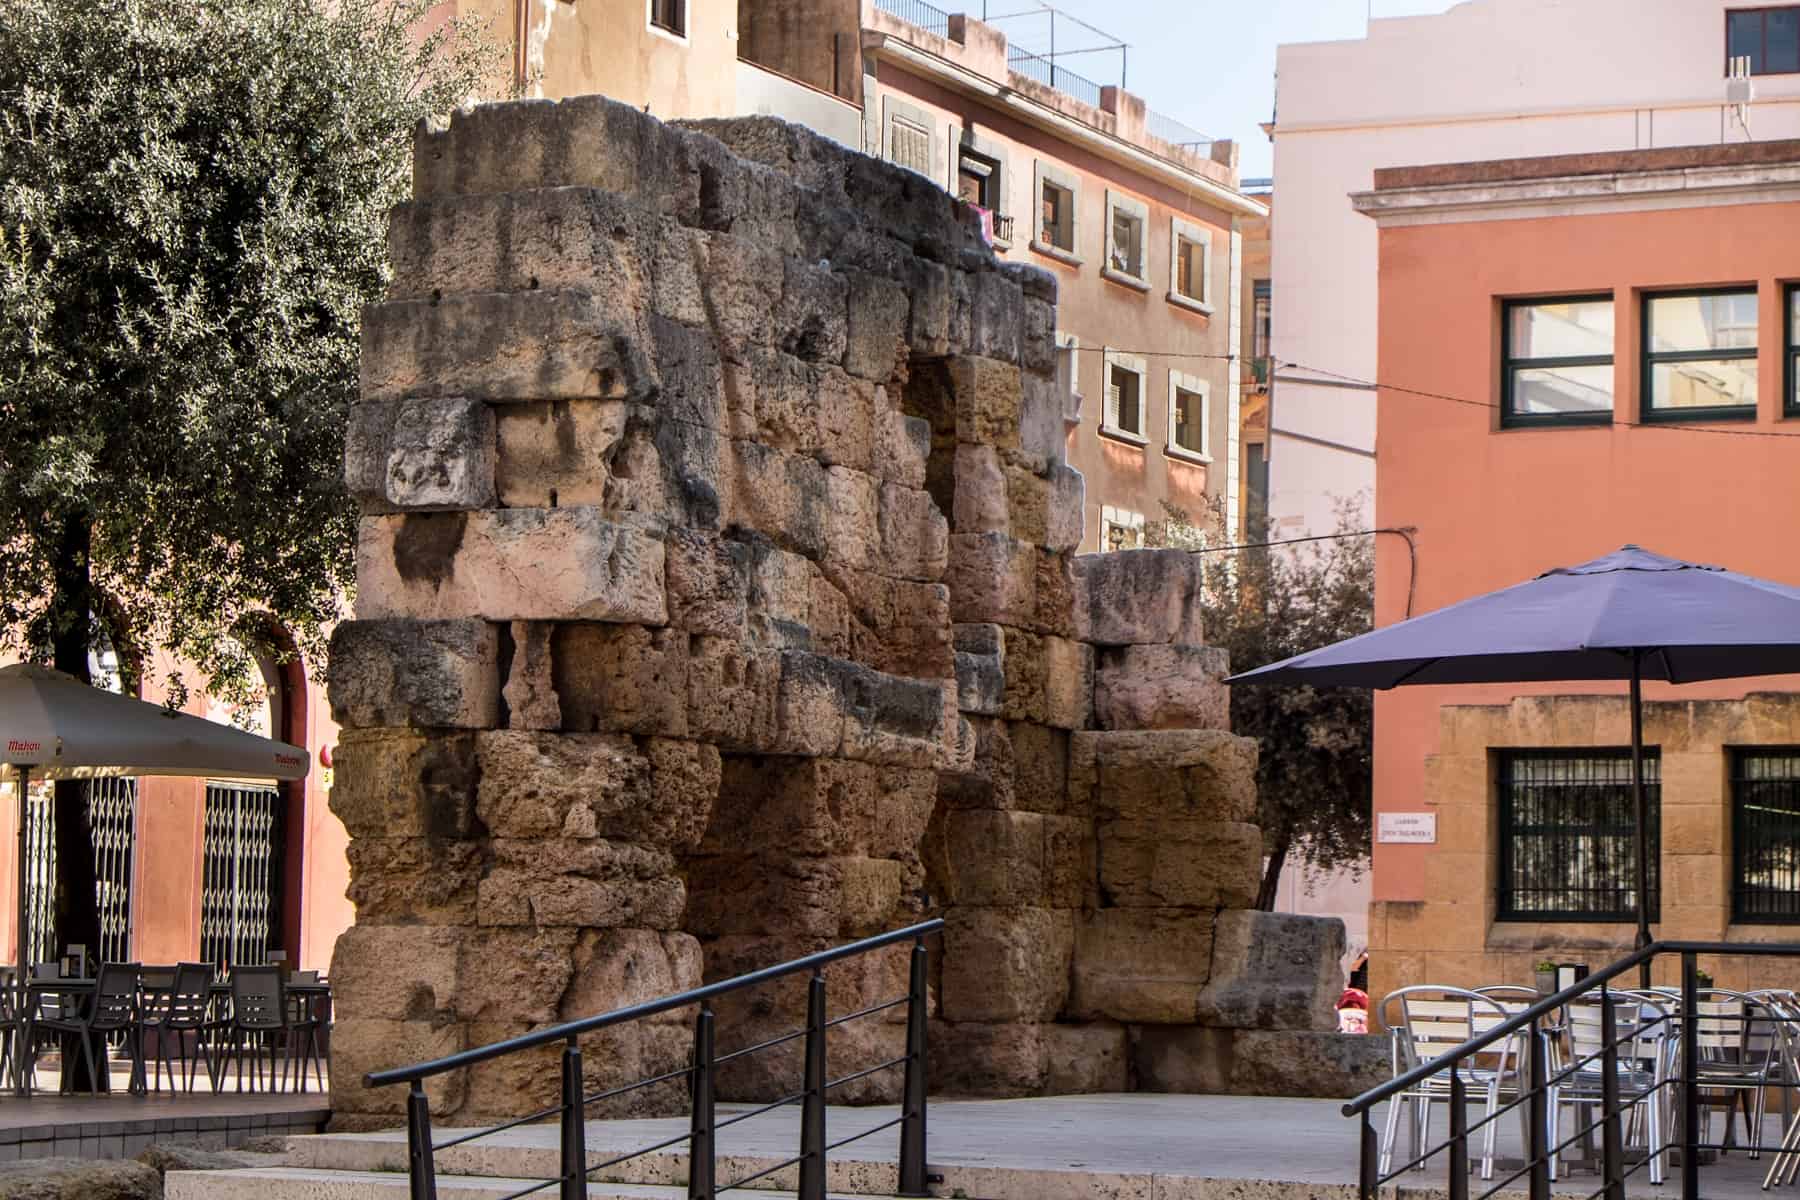 Remains of Roman Ruins in the streets of Tarragona, in a public square right outside of pastel coloured apartment buildings